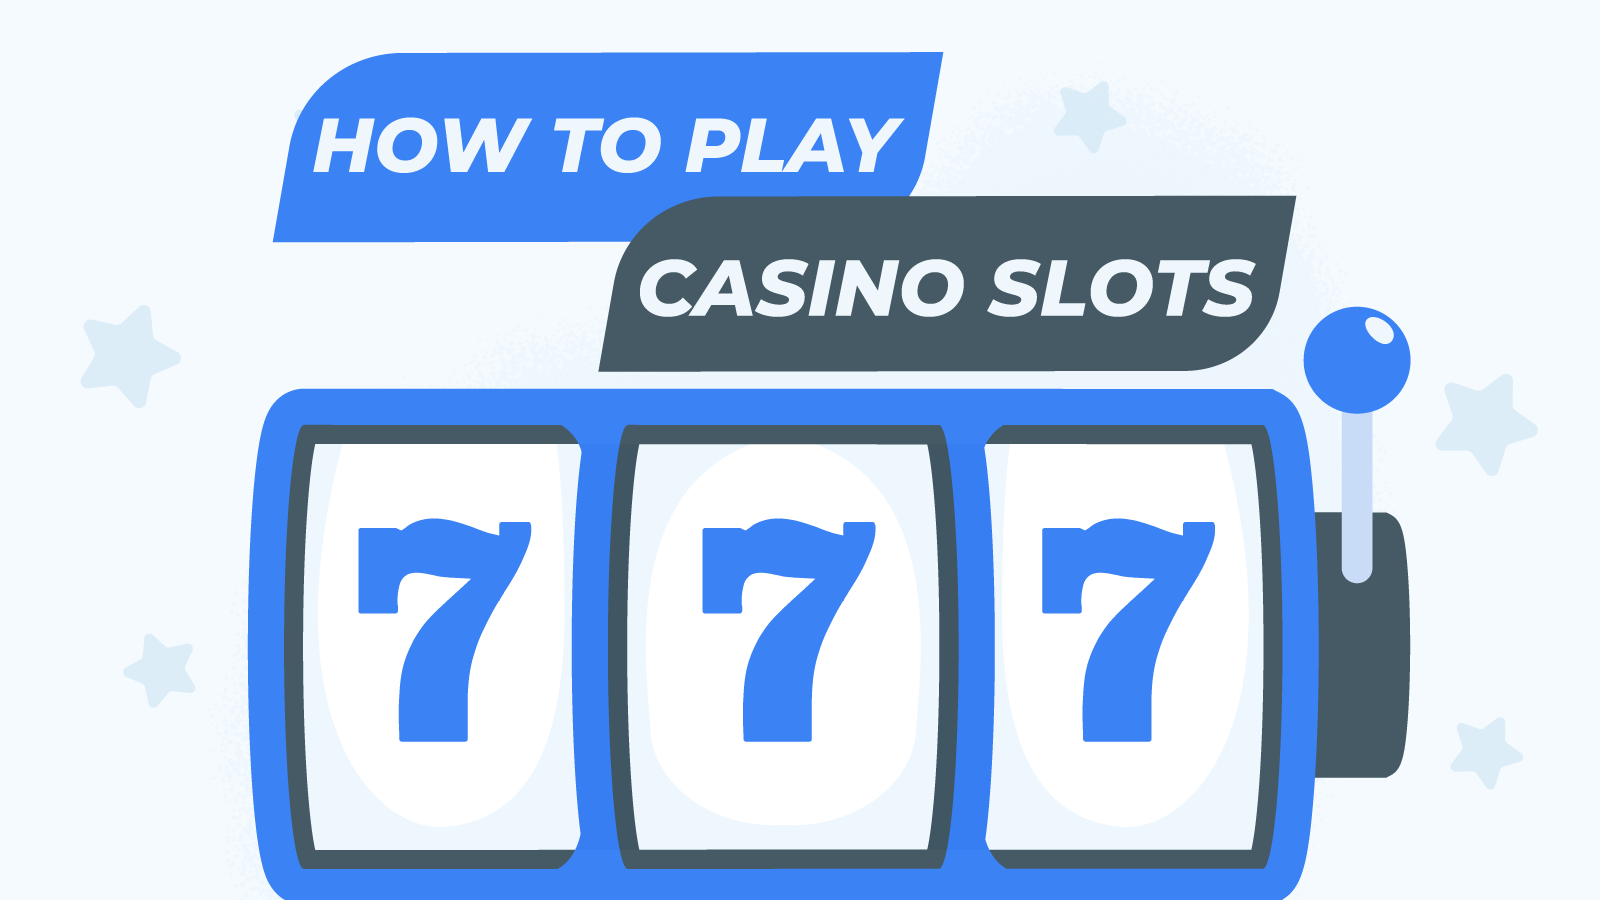 How to Play Slots at a Casino: 5-Step Gambling Strategy